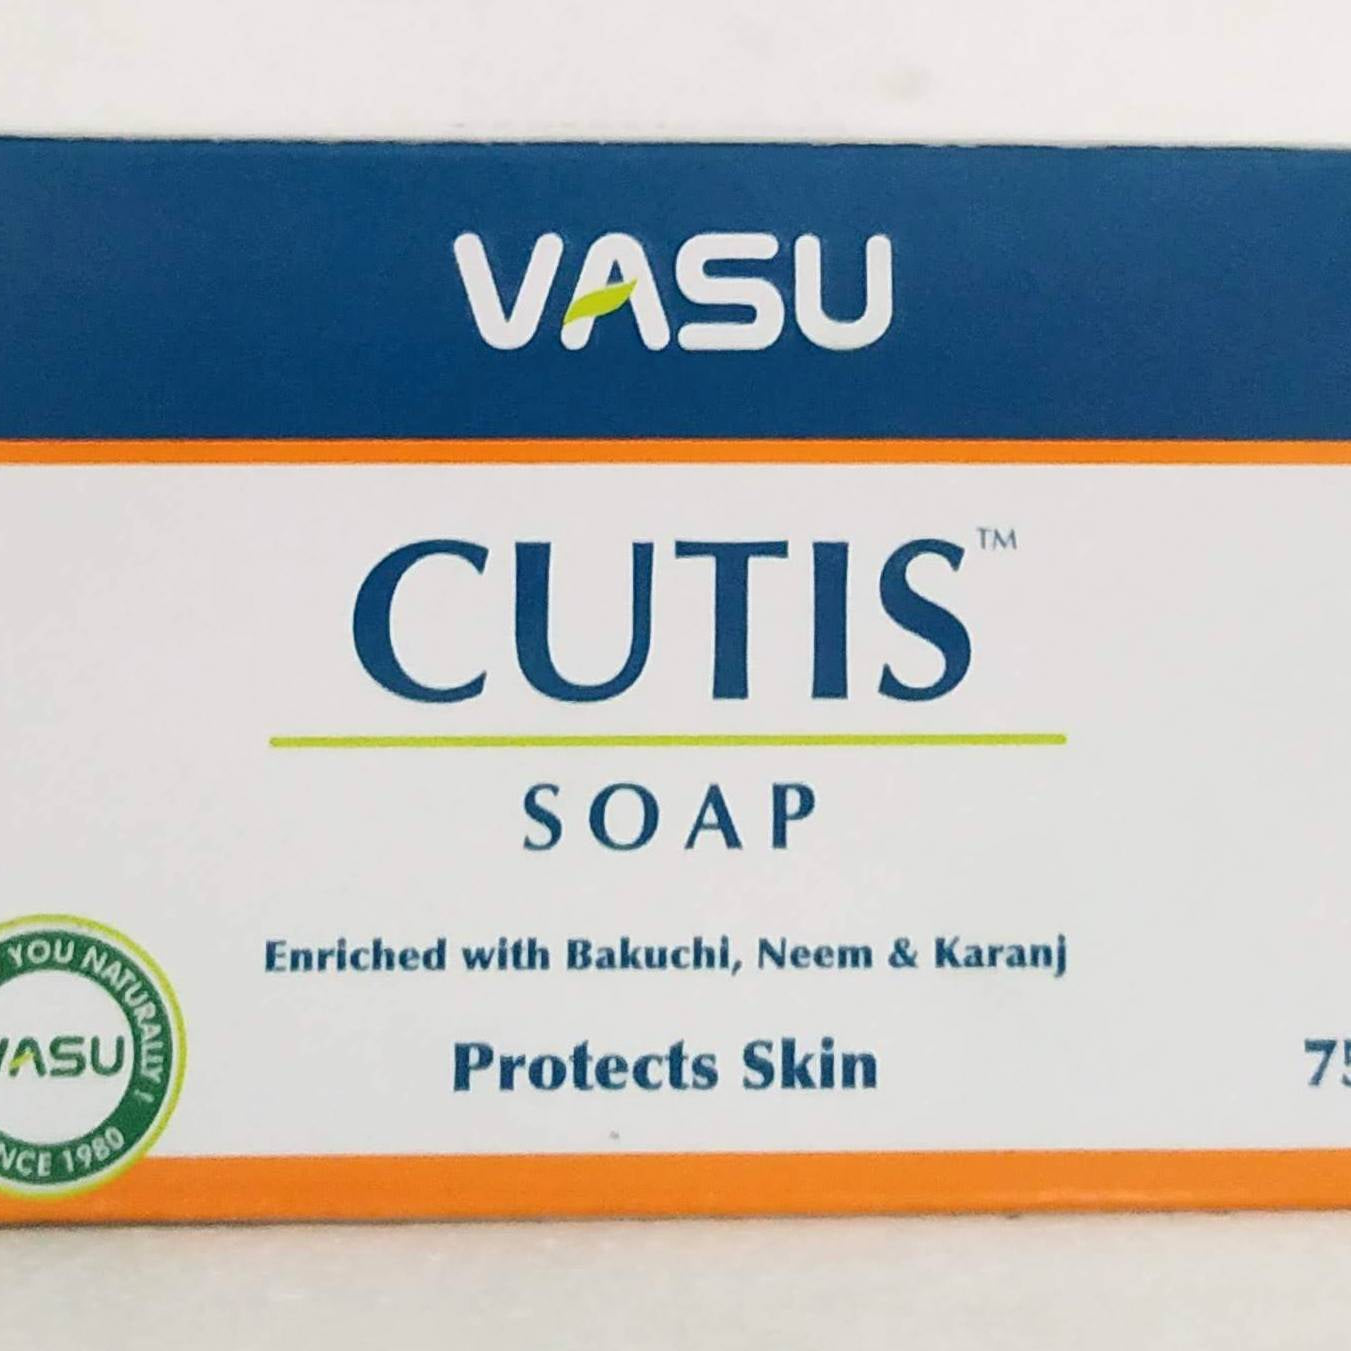 Shop Cutis soap 75gm at price 75.00 from Vasu herbals Online - Ayush Care